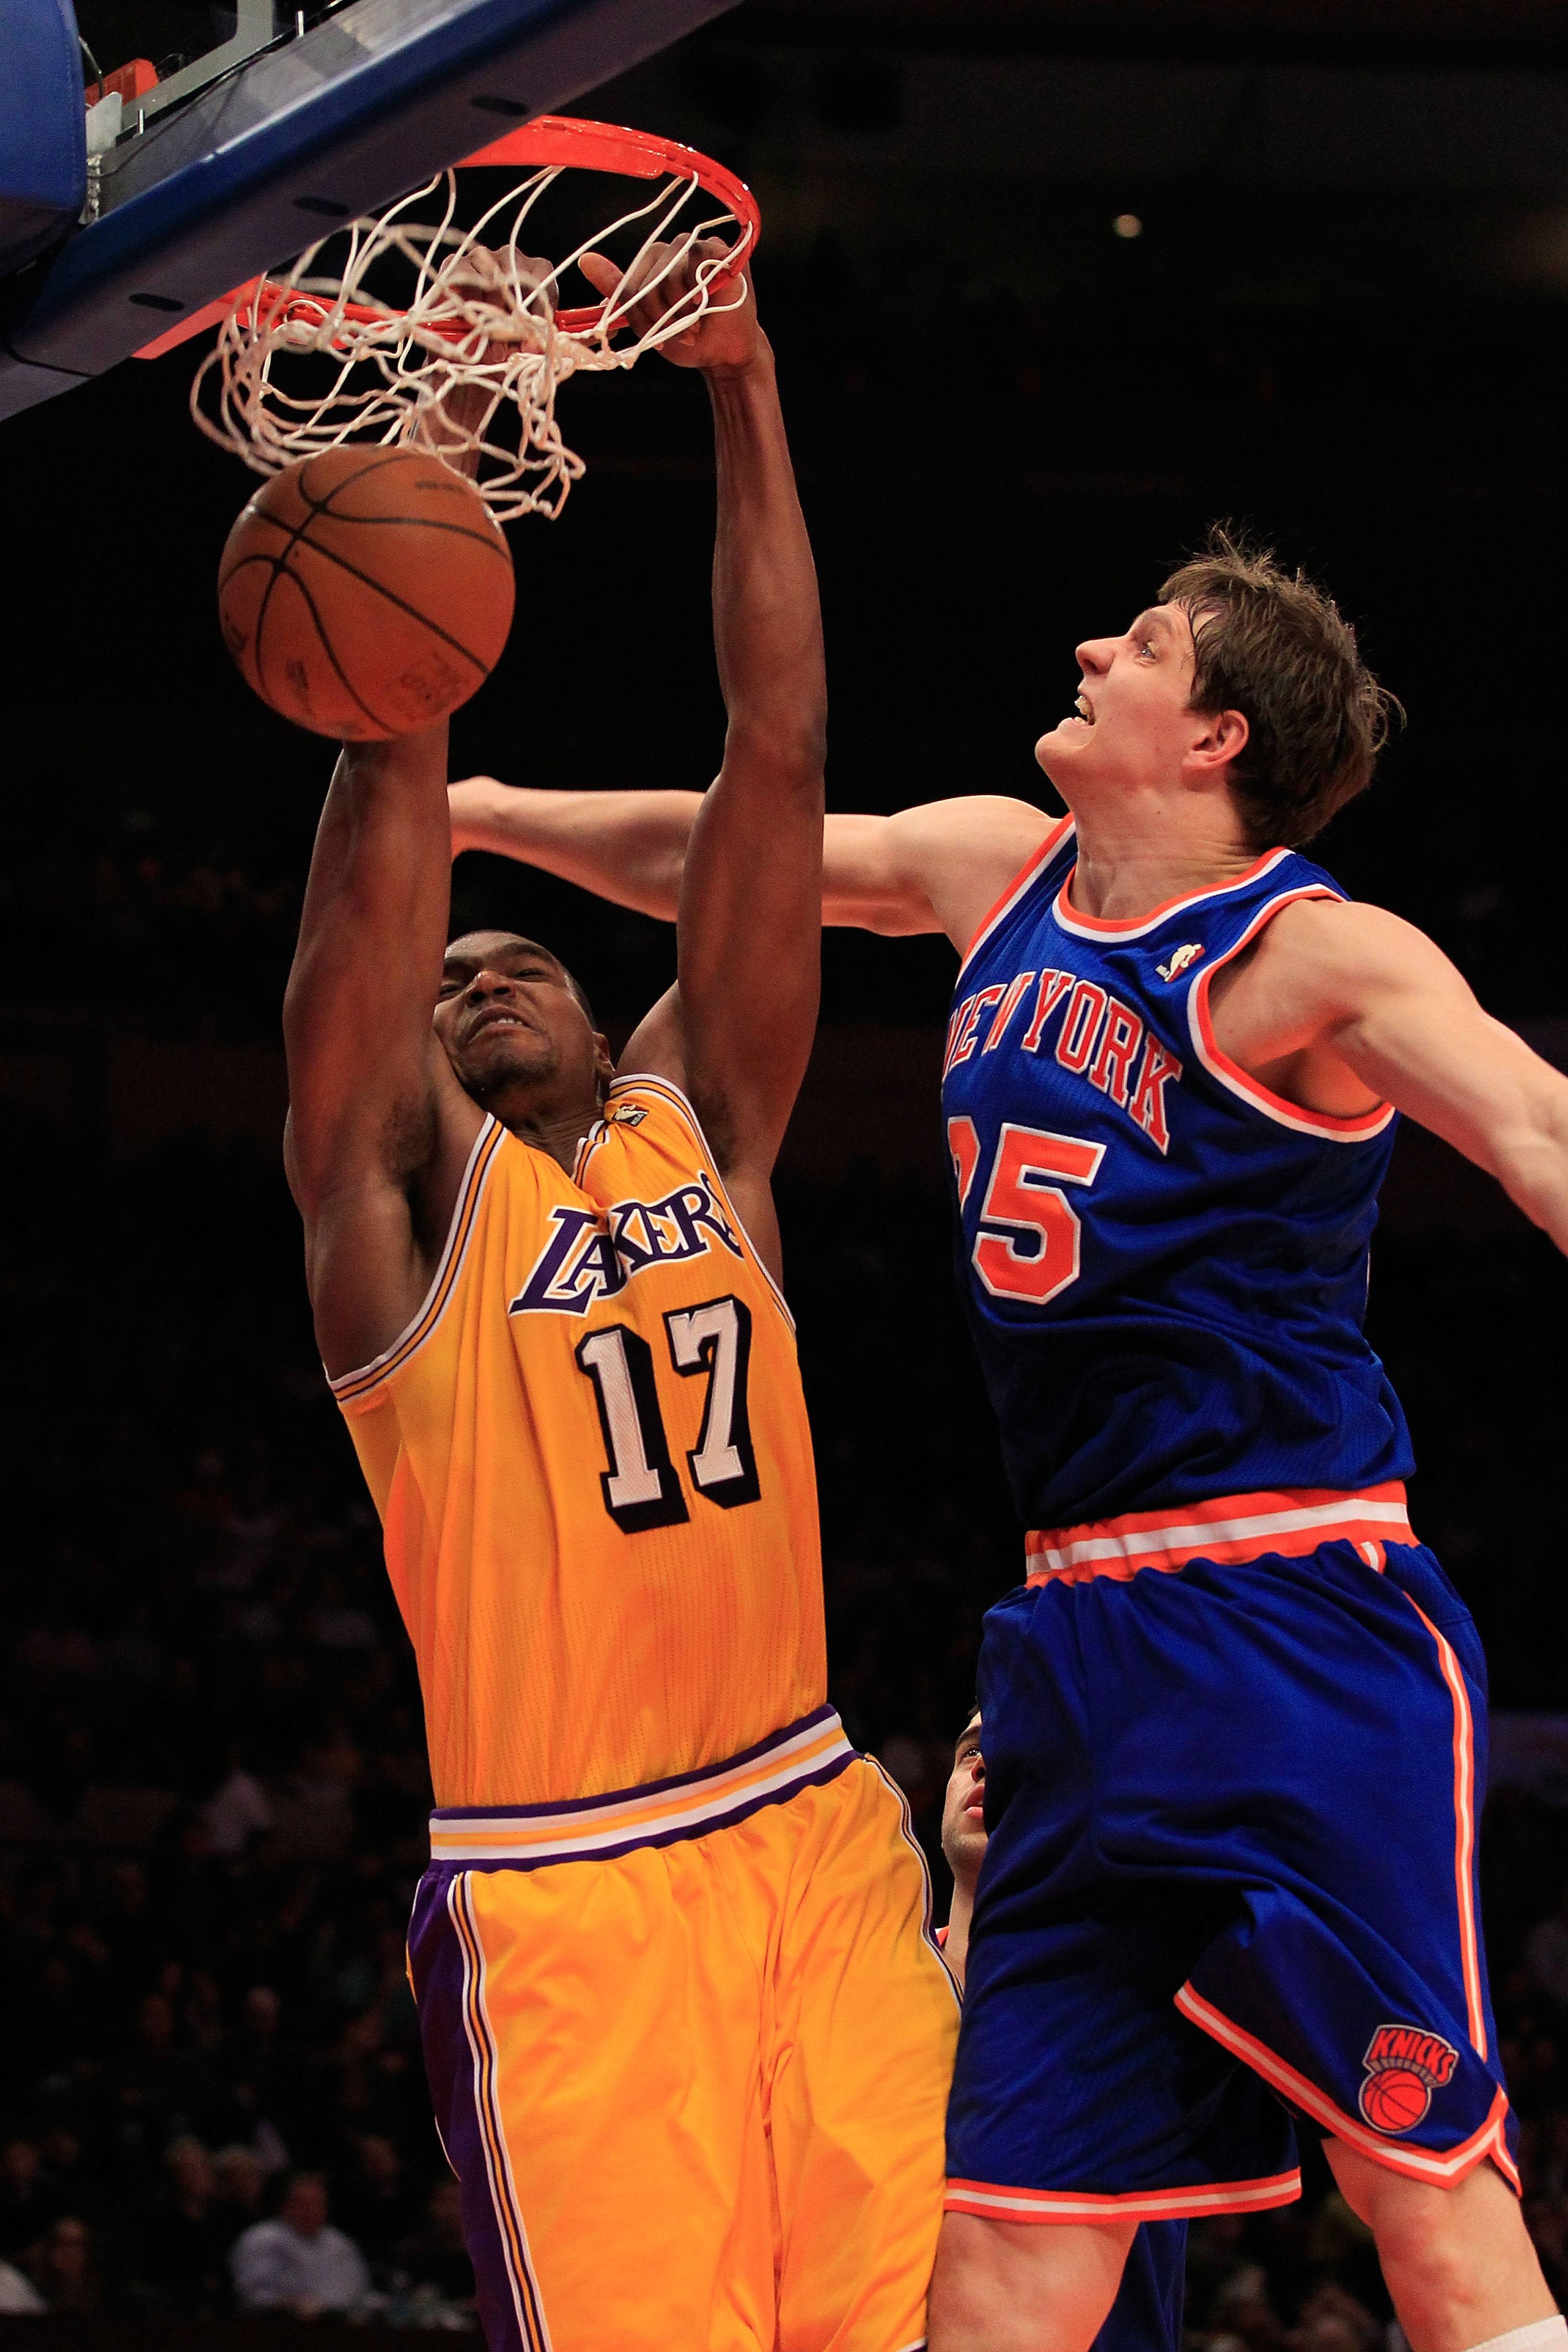 NEW YORK, NY - FEBRUARY 11: Andrew Bynum #17 of the Los Angeles Lakers shoots over Timofey Mozgov #25 of the New York Knicks at Madison Square Garden on February 11, 2011 in New York City. NOTE TO USER: User expressly acknowledges and agrees that, by down